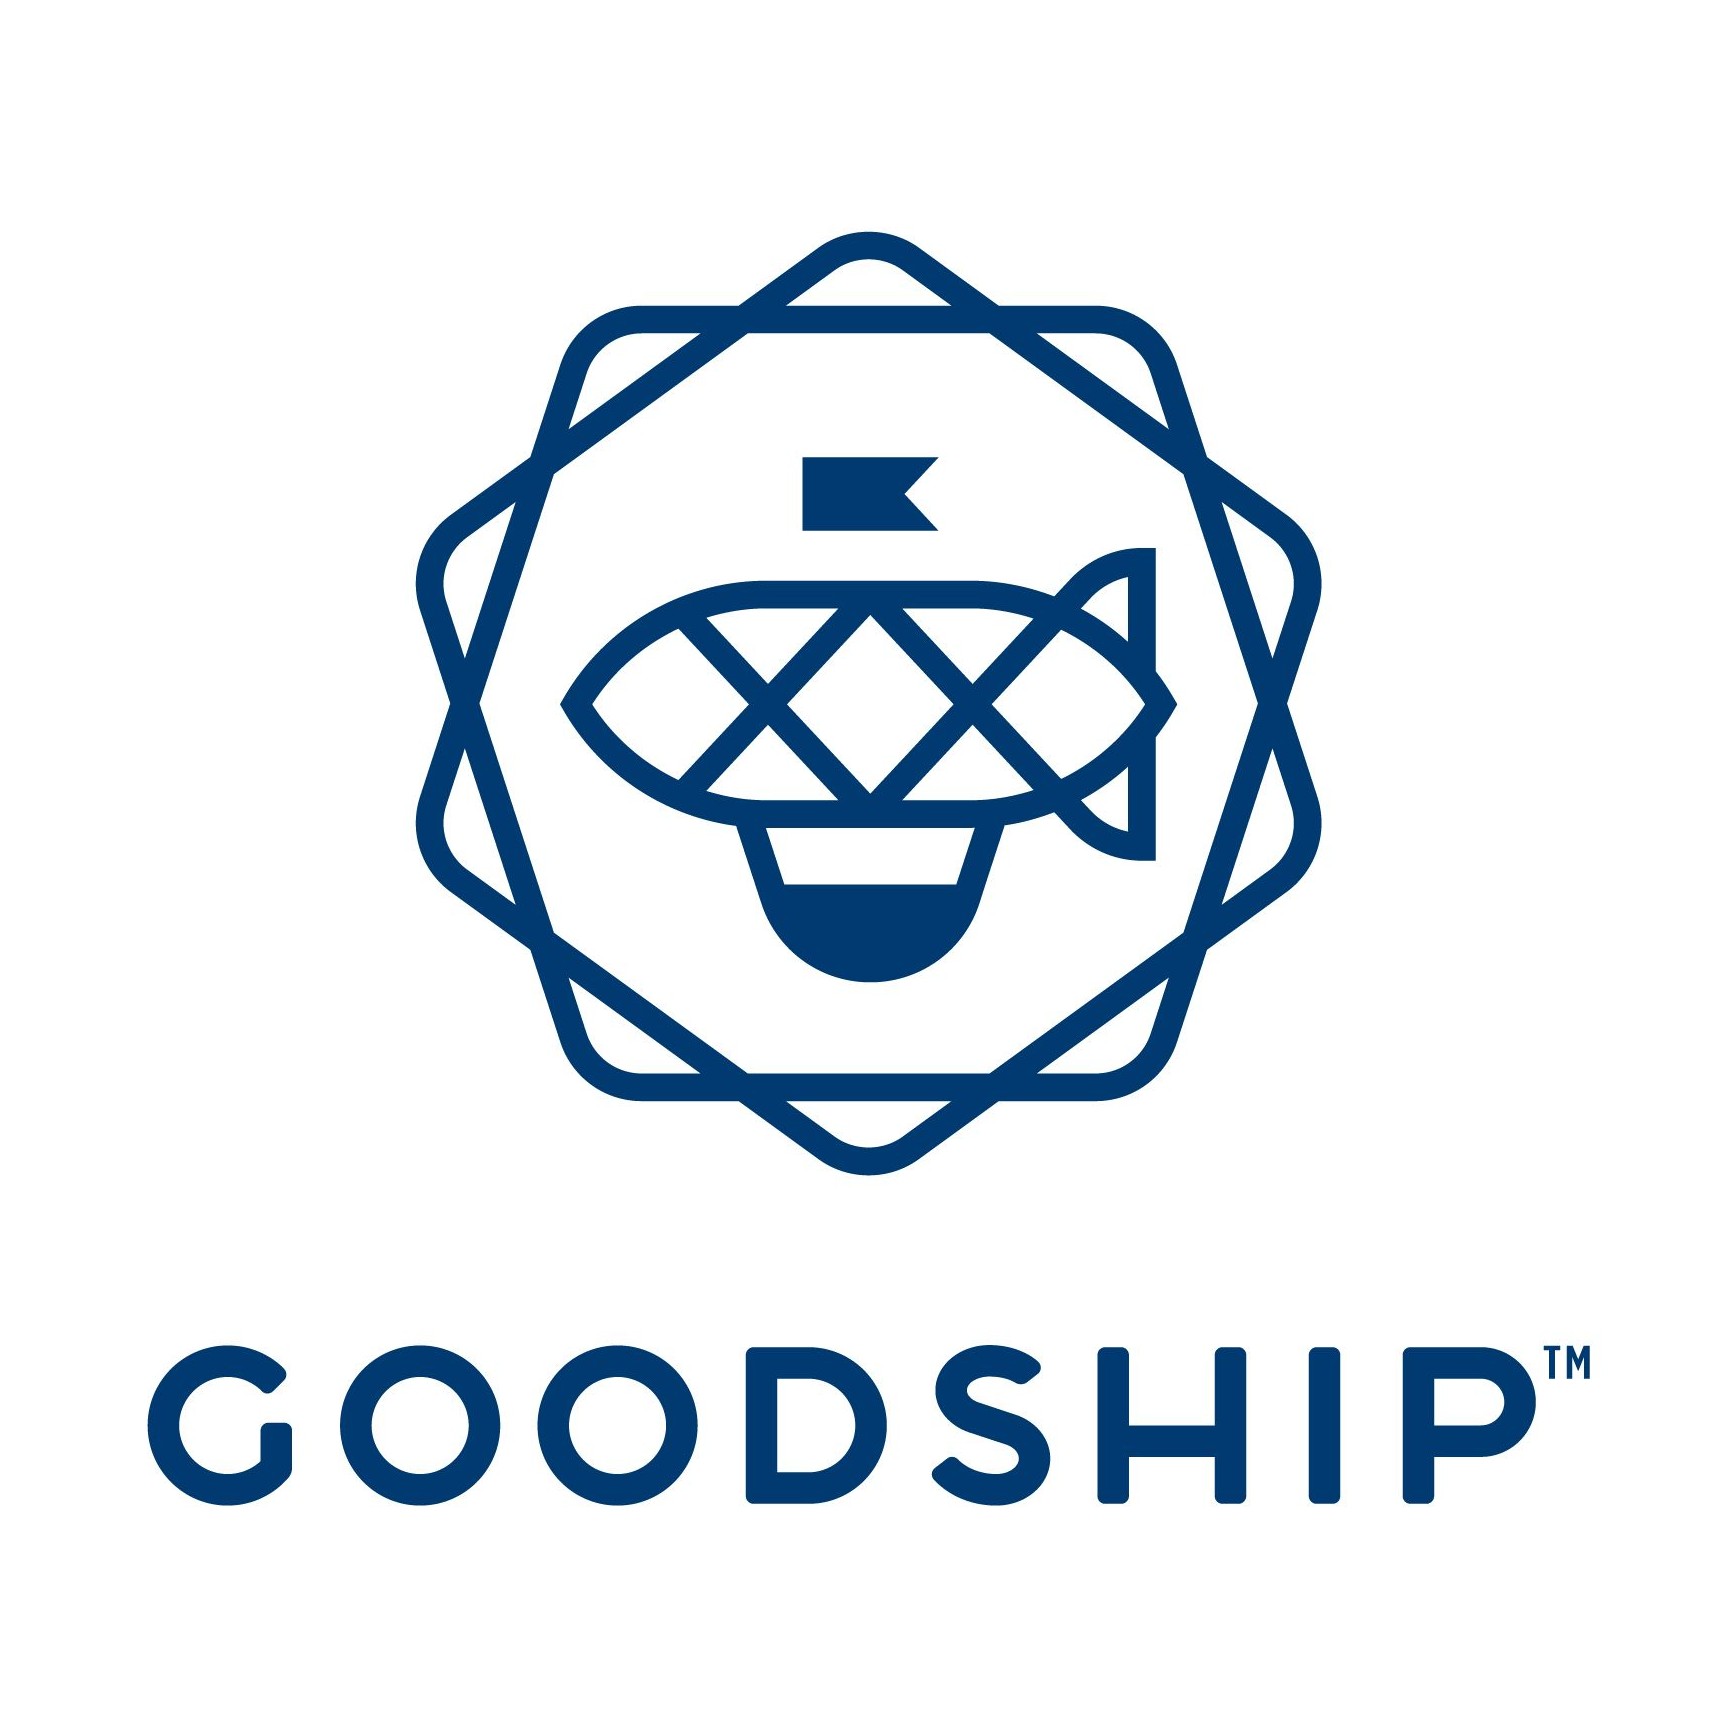 Goodship: All Aboard | Leafly